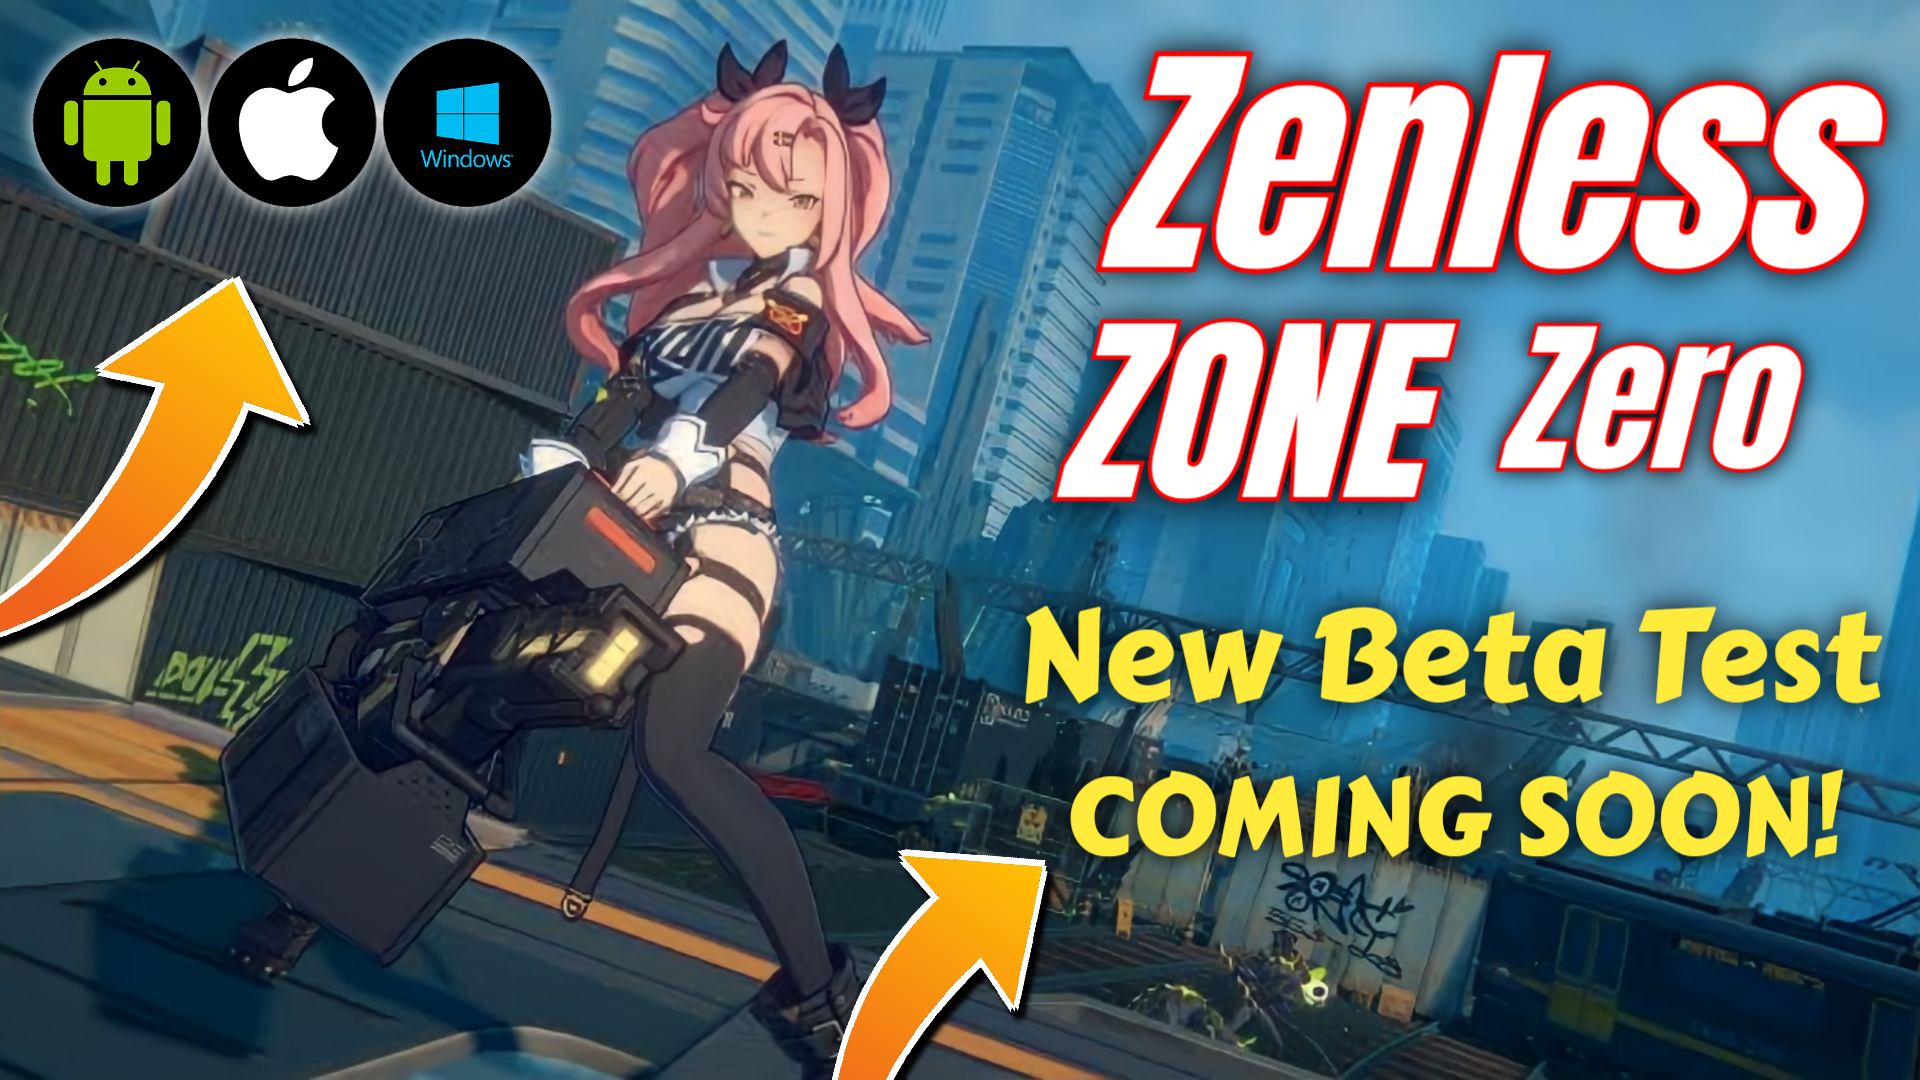 Zenless Zone Zero - Mobile First Gameplay (Android/iOS